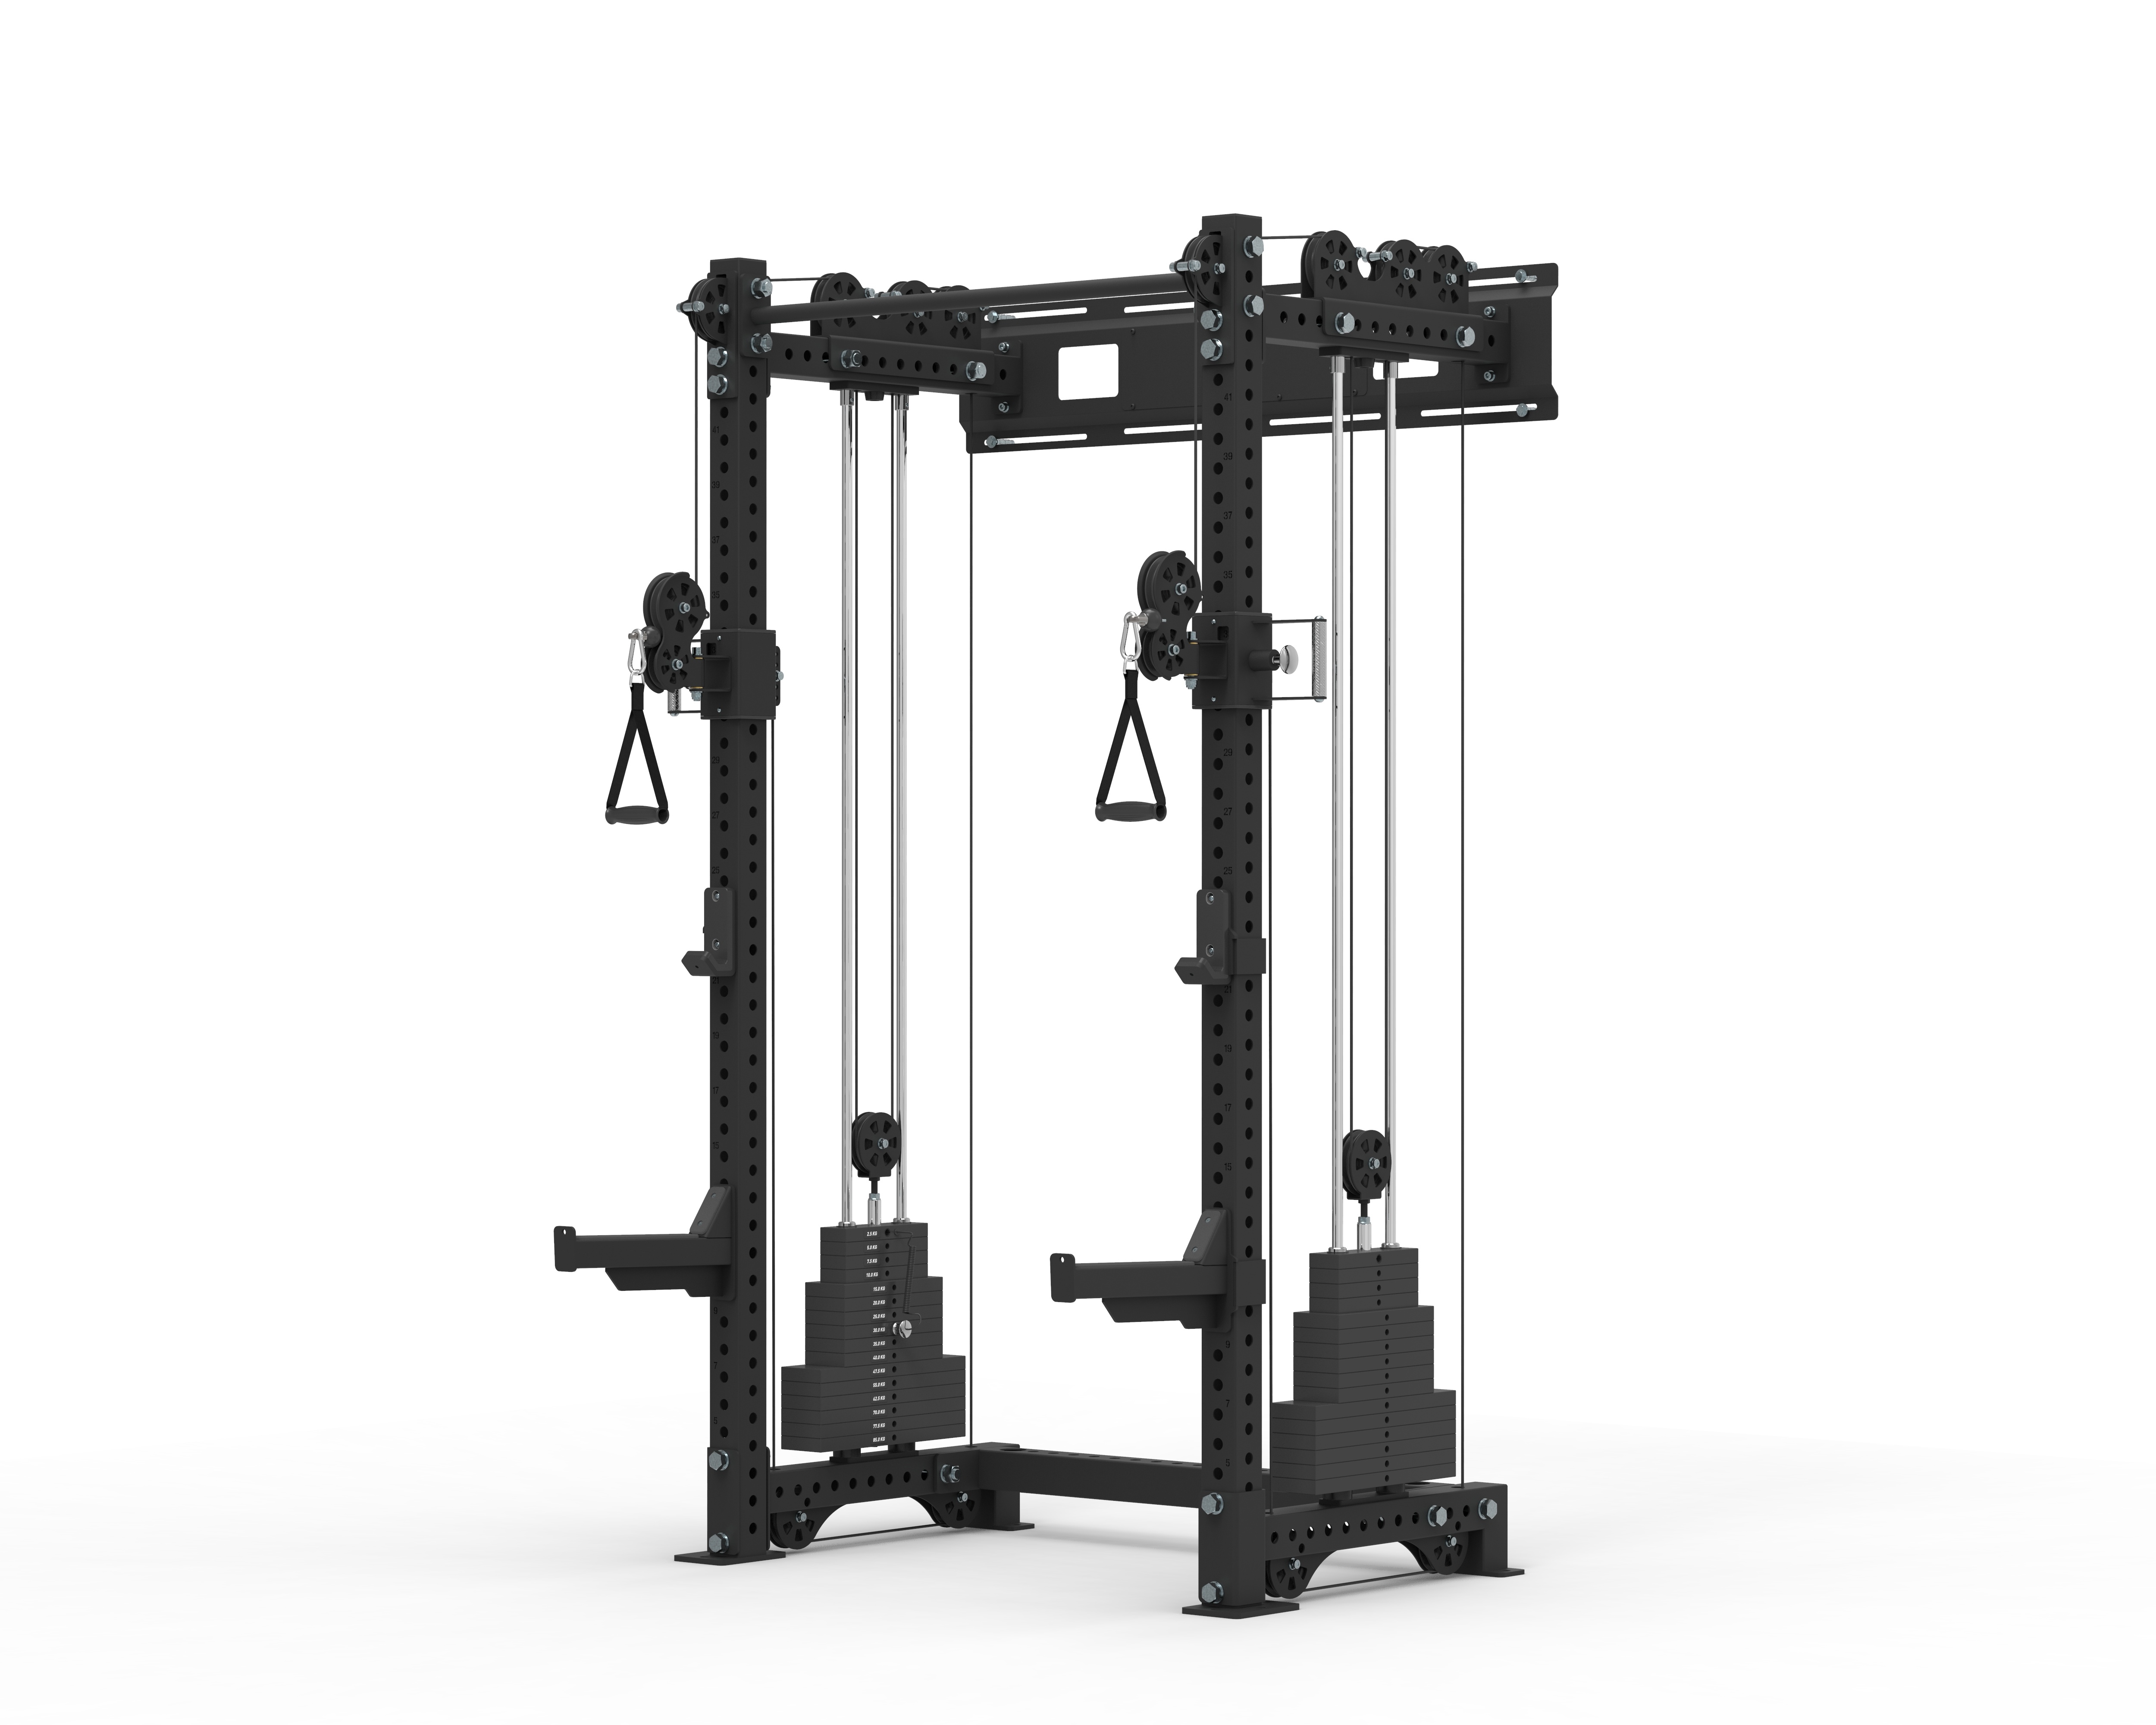 Wall Mounted Daul Pulley Functional Trainer Rack